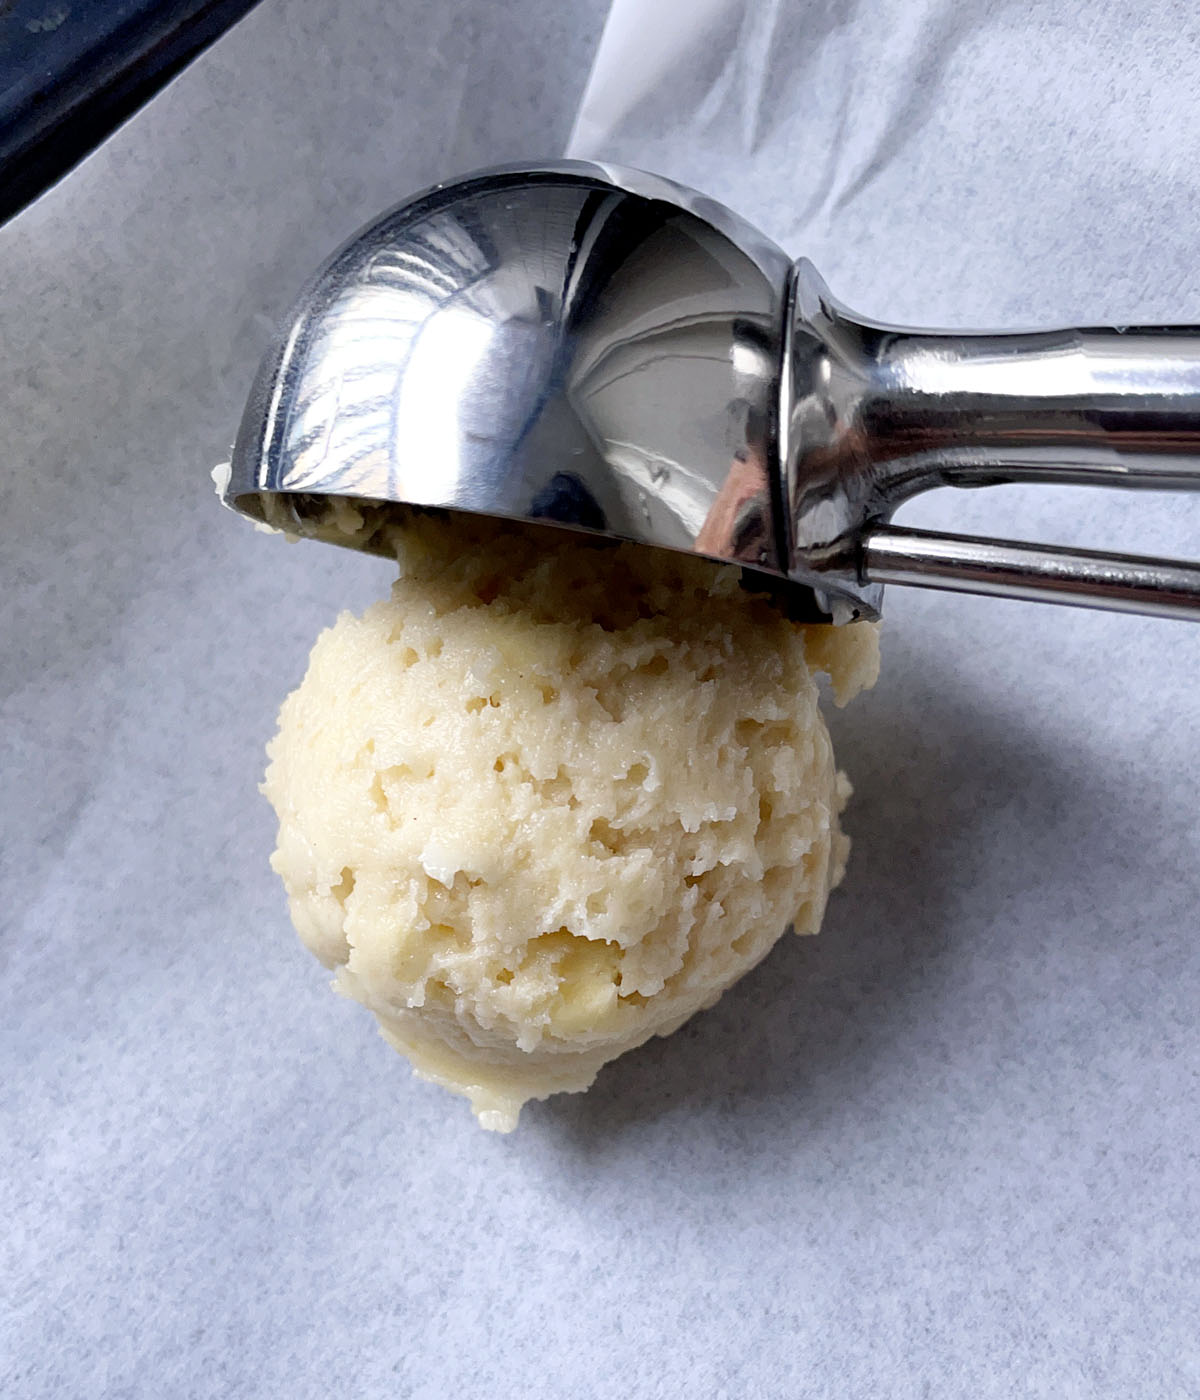 A metal scoop lifting off a scoop of scone dough on parchment paper.